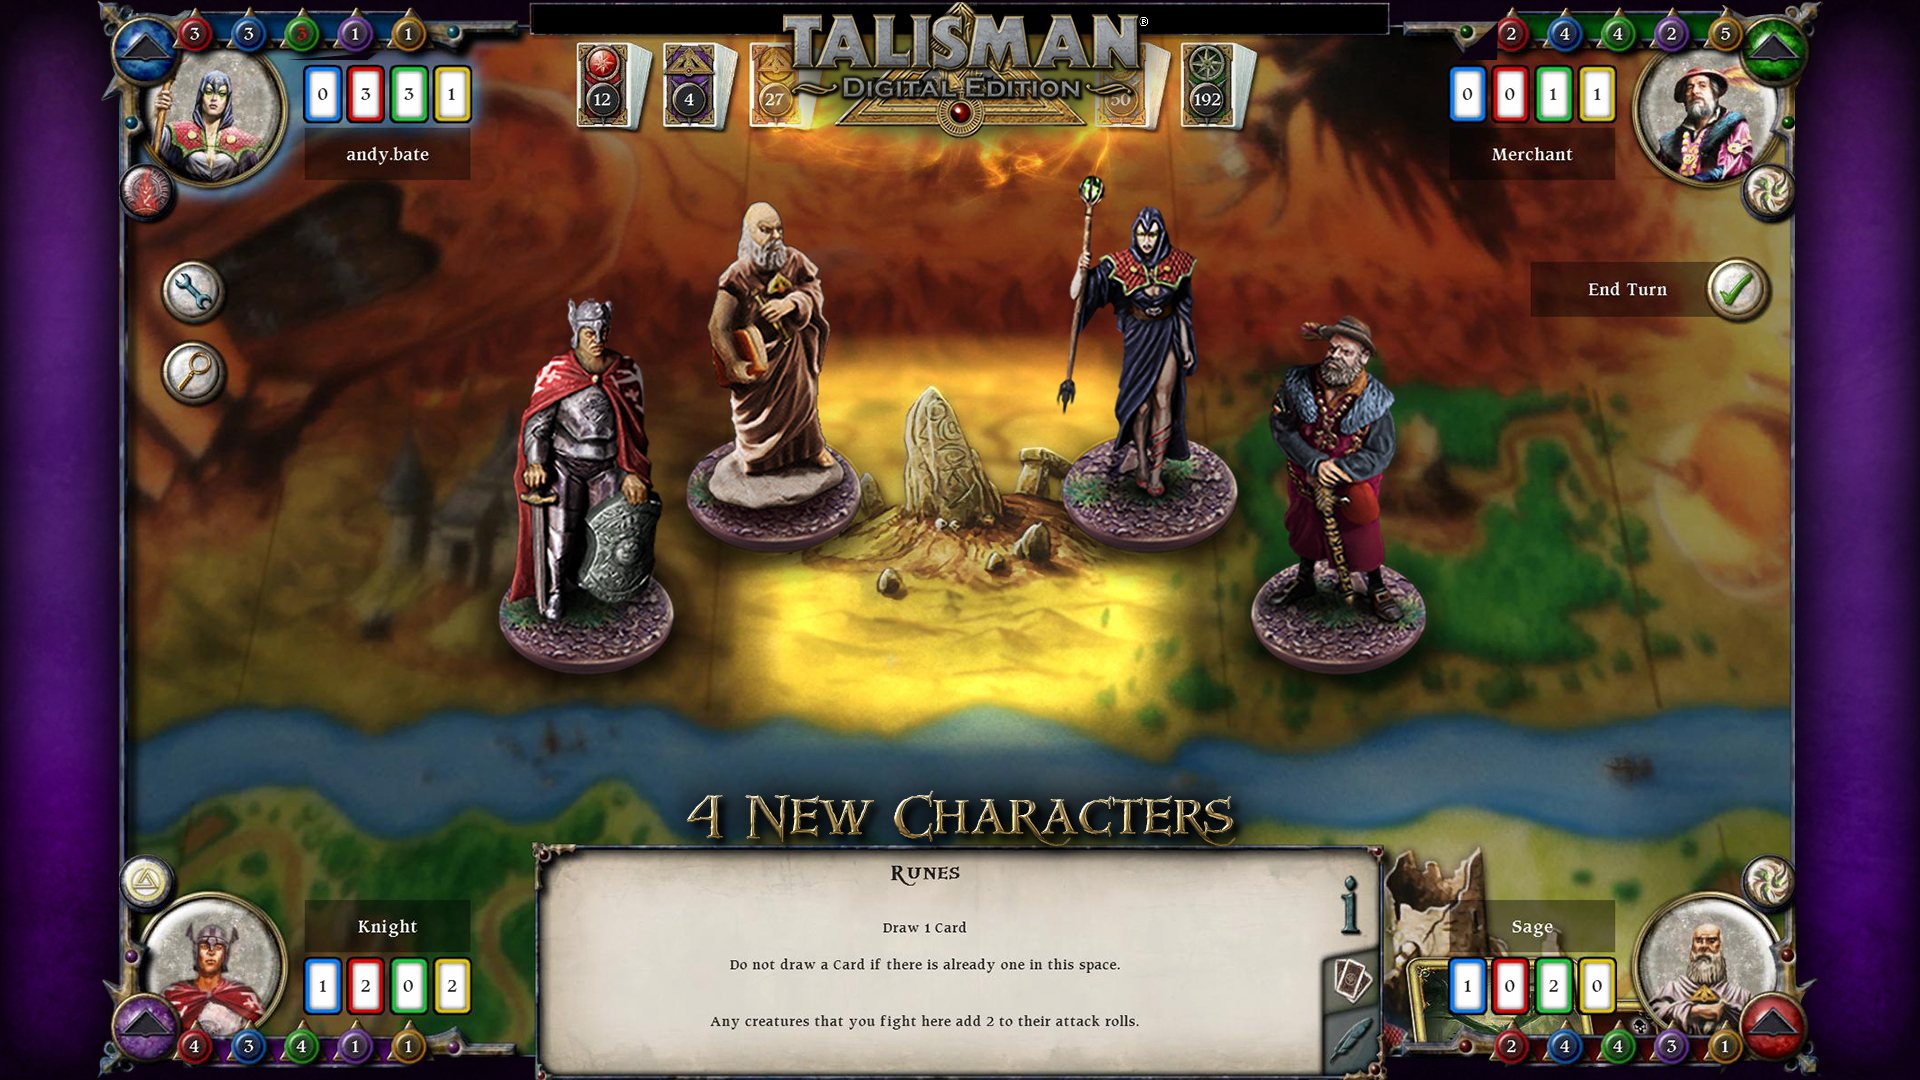 Talisman - The Reaper Expansion Pack DLC Steam CD Key 6.77 $